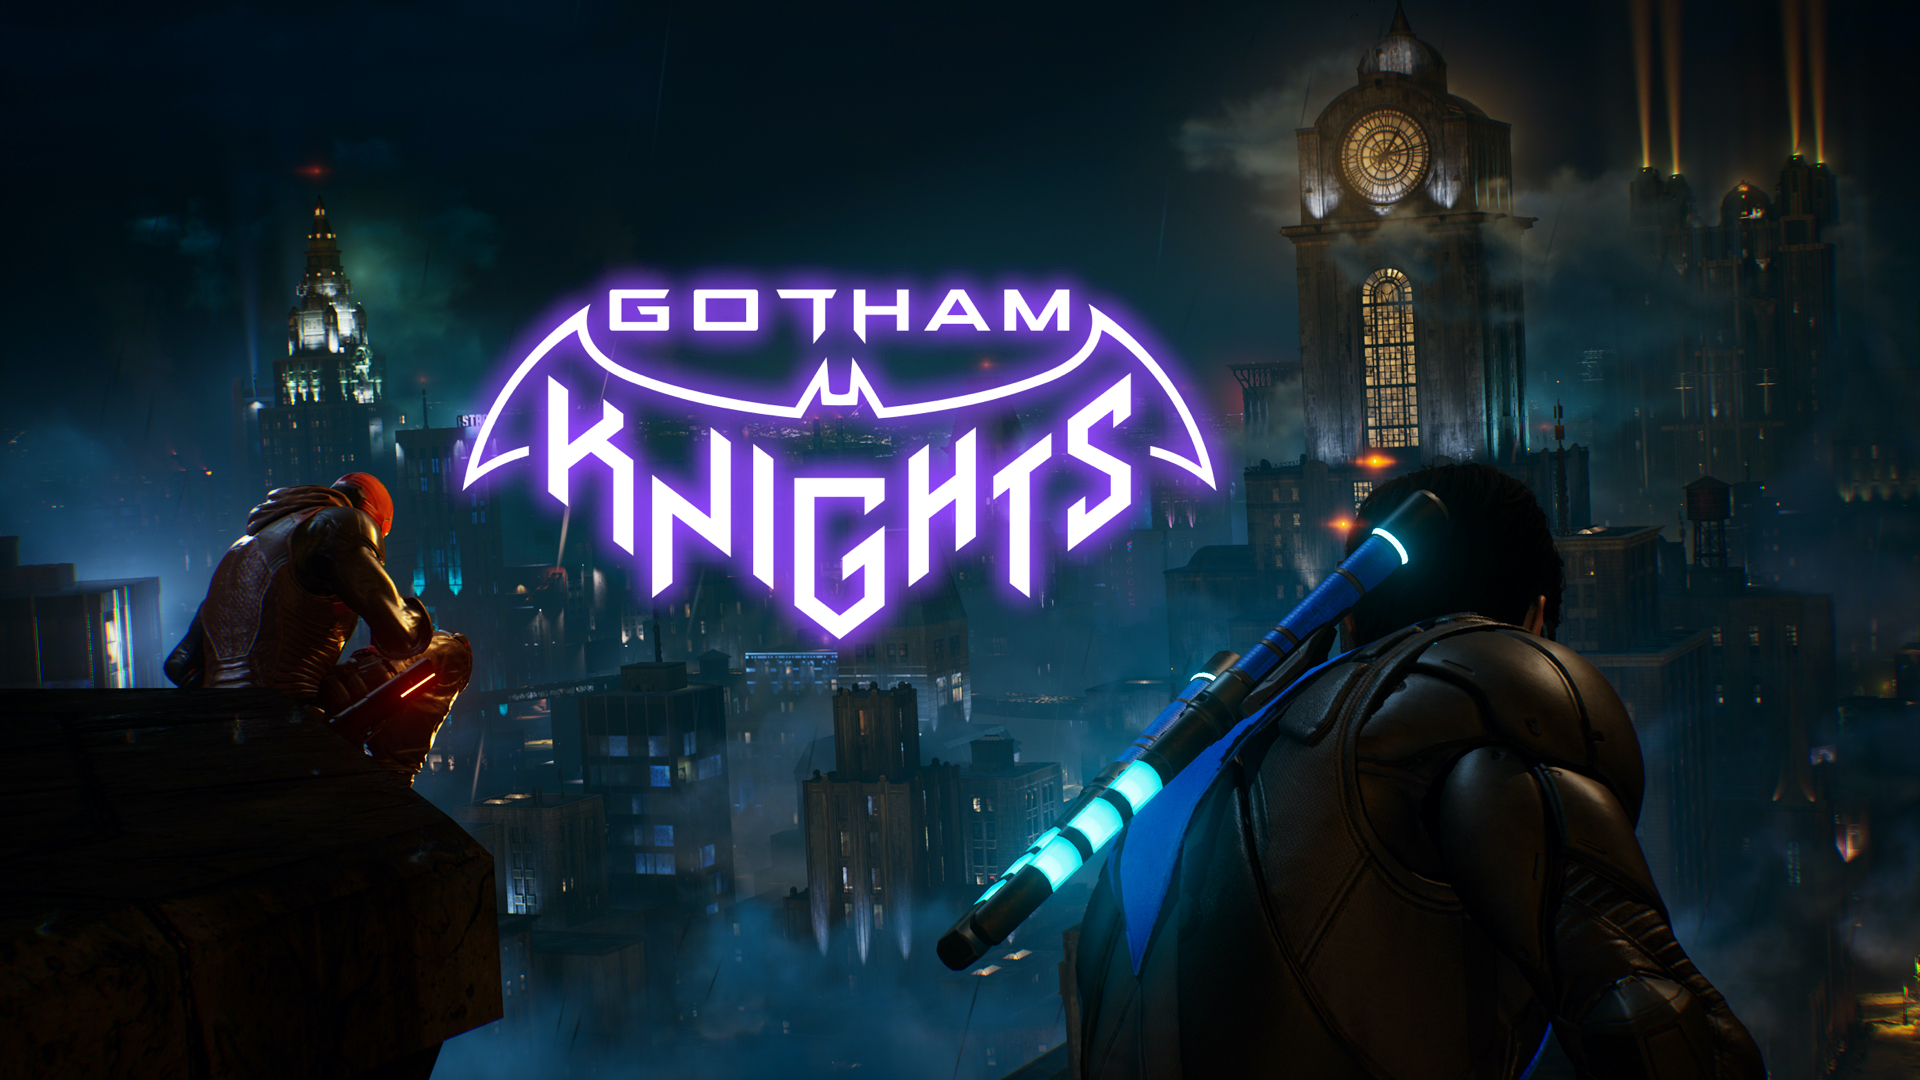 Gotham Knights Is A Self Contained Story, Not A Live Service Game, Says Developer